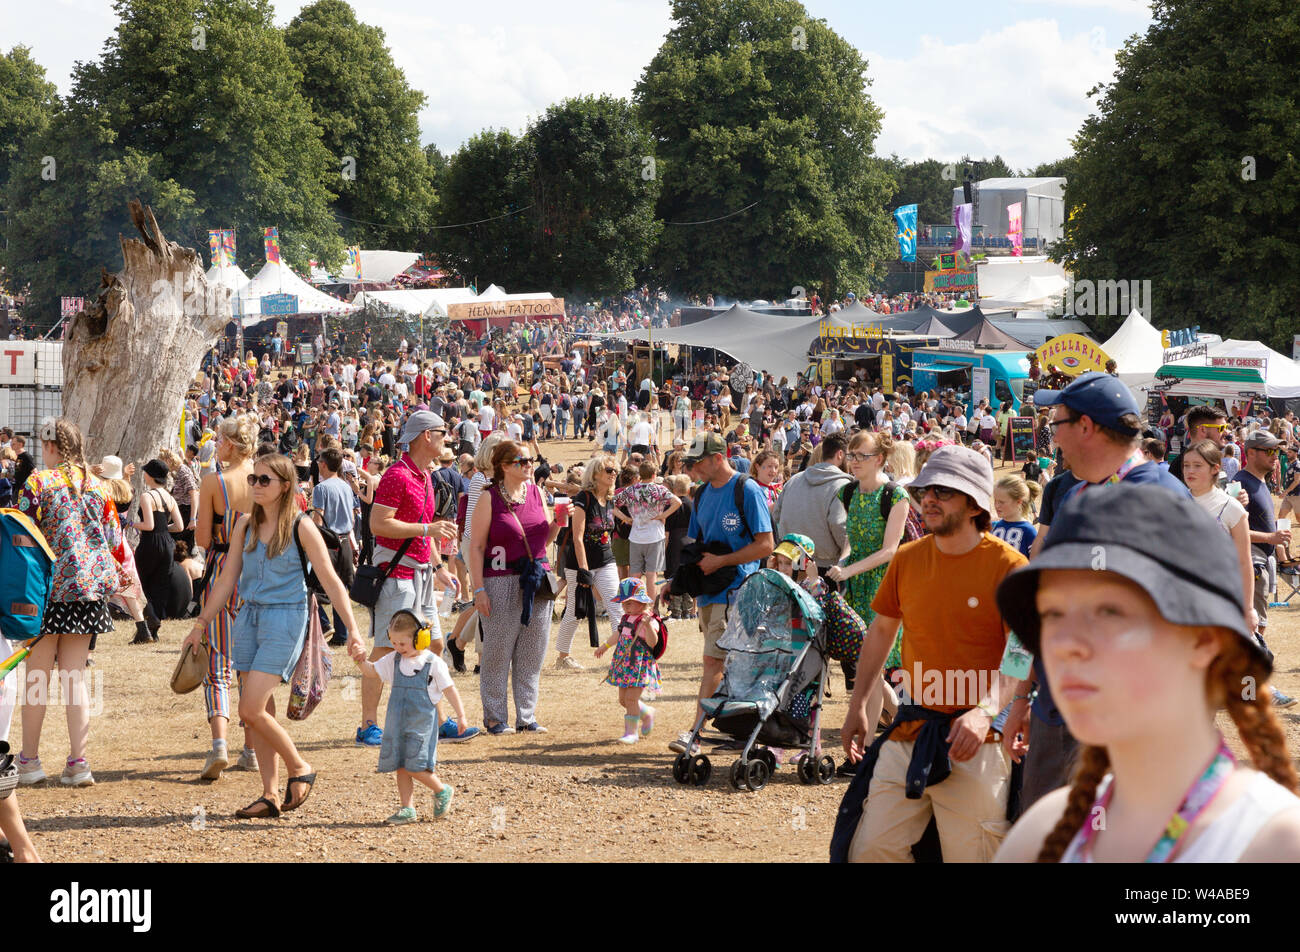 Festival crowd UK; Latitude festival Suffolk UK - crowded scene with crowds of people at the music festival, Suffolk Latitude UK 2019 Stock Photo